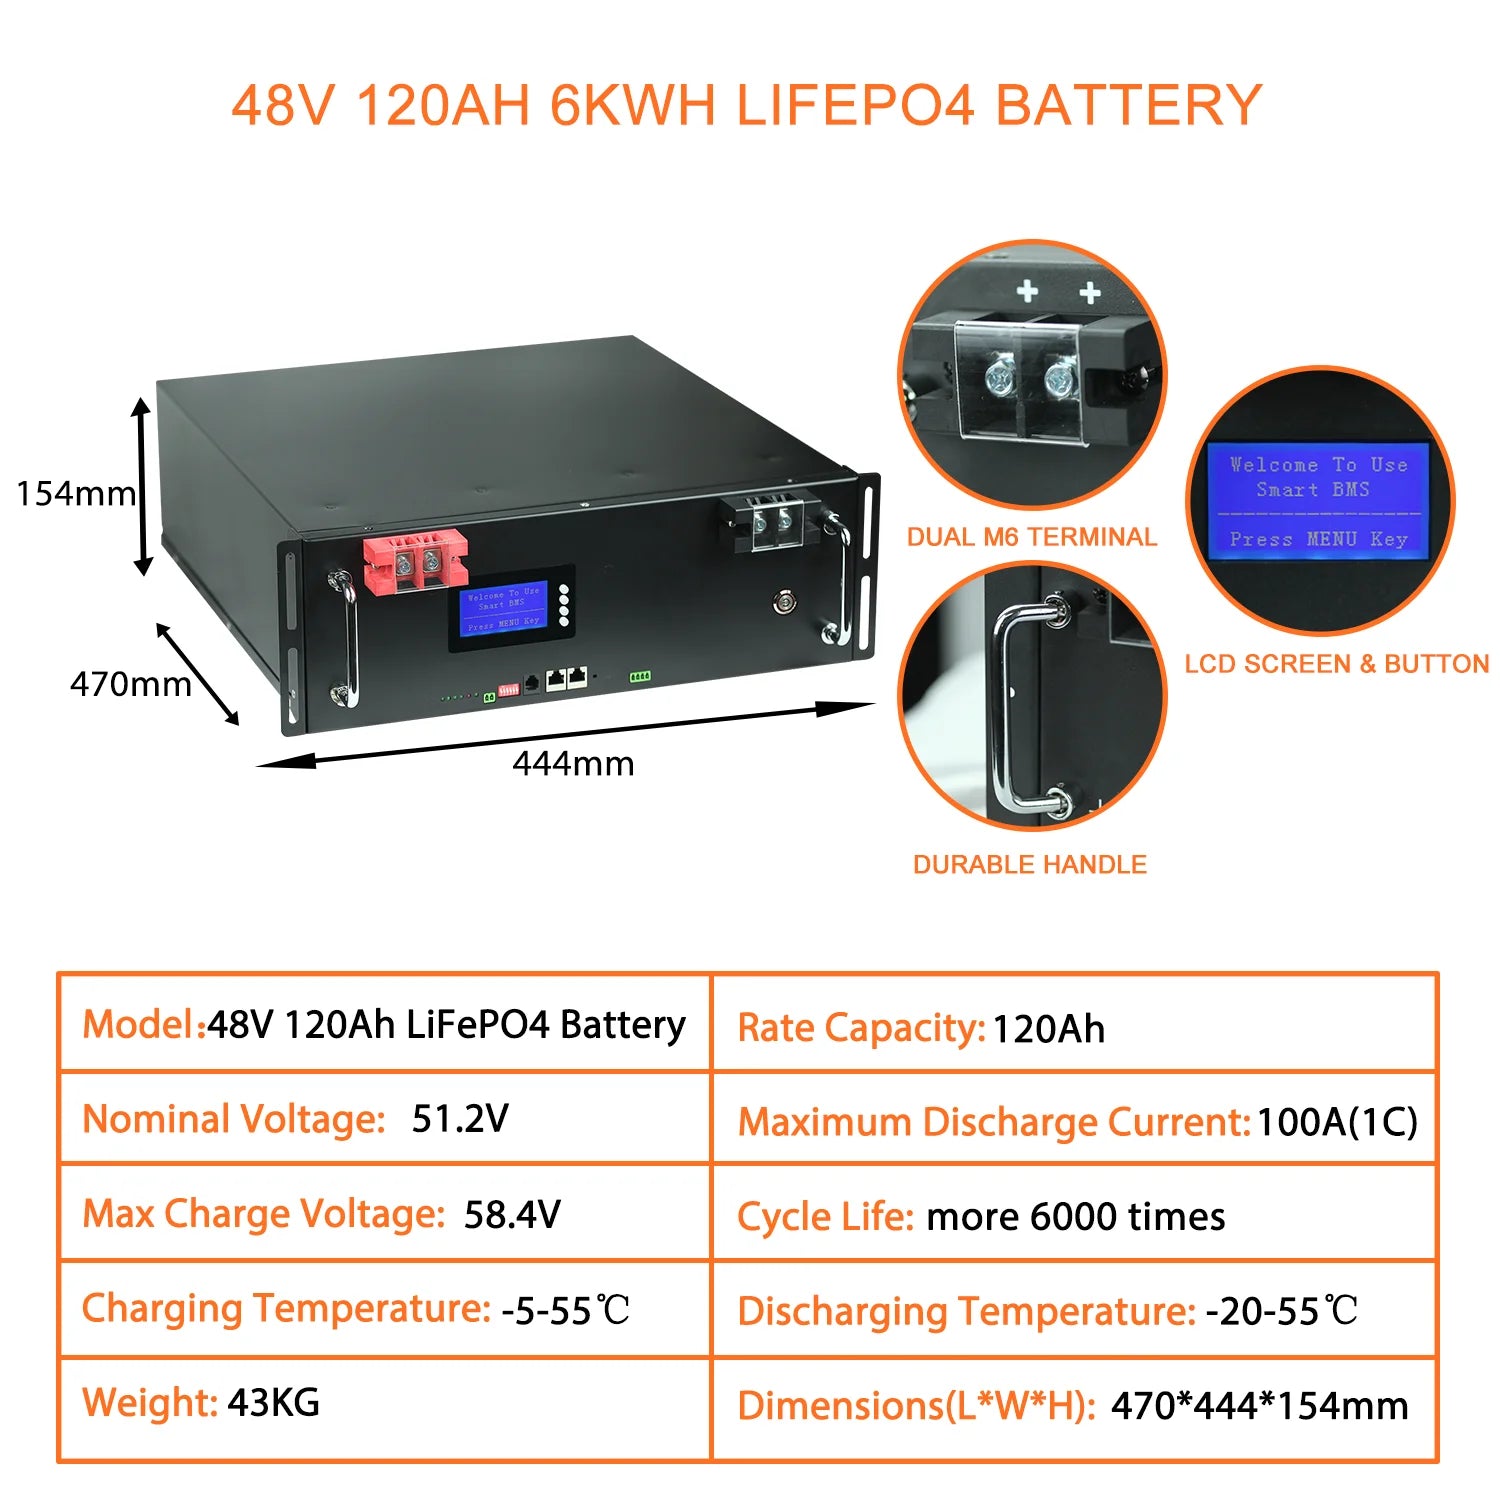 48V 120Ah LiFePO4 battery with smart BMS and features for safe use.